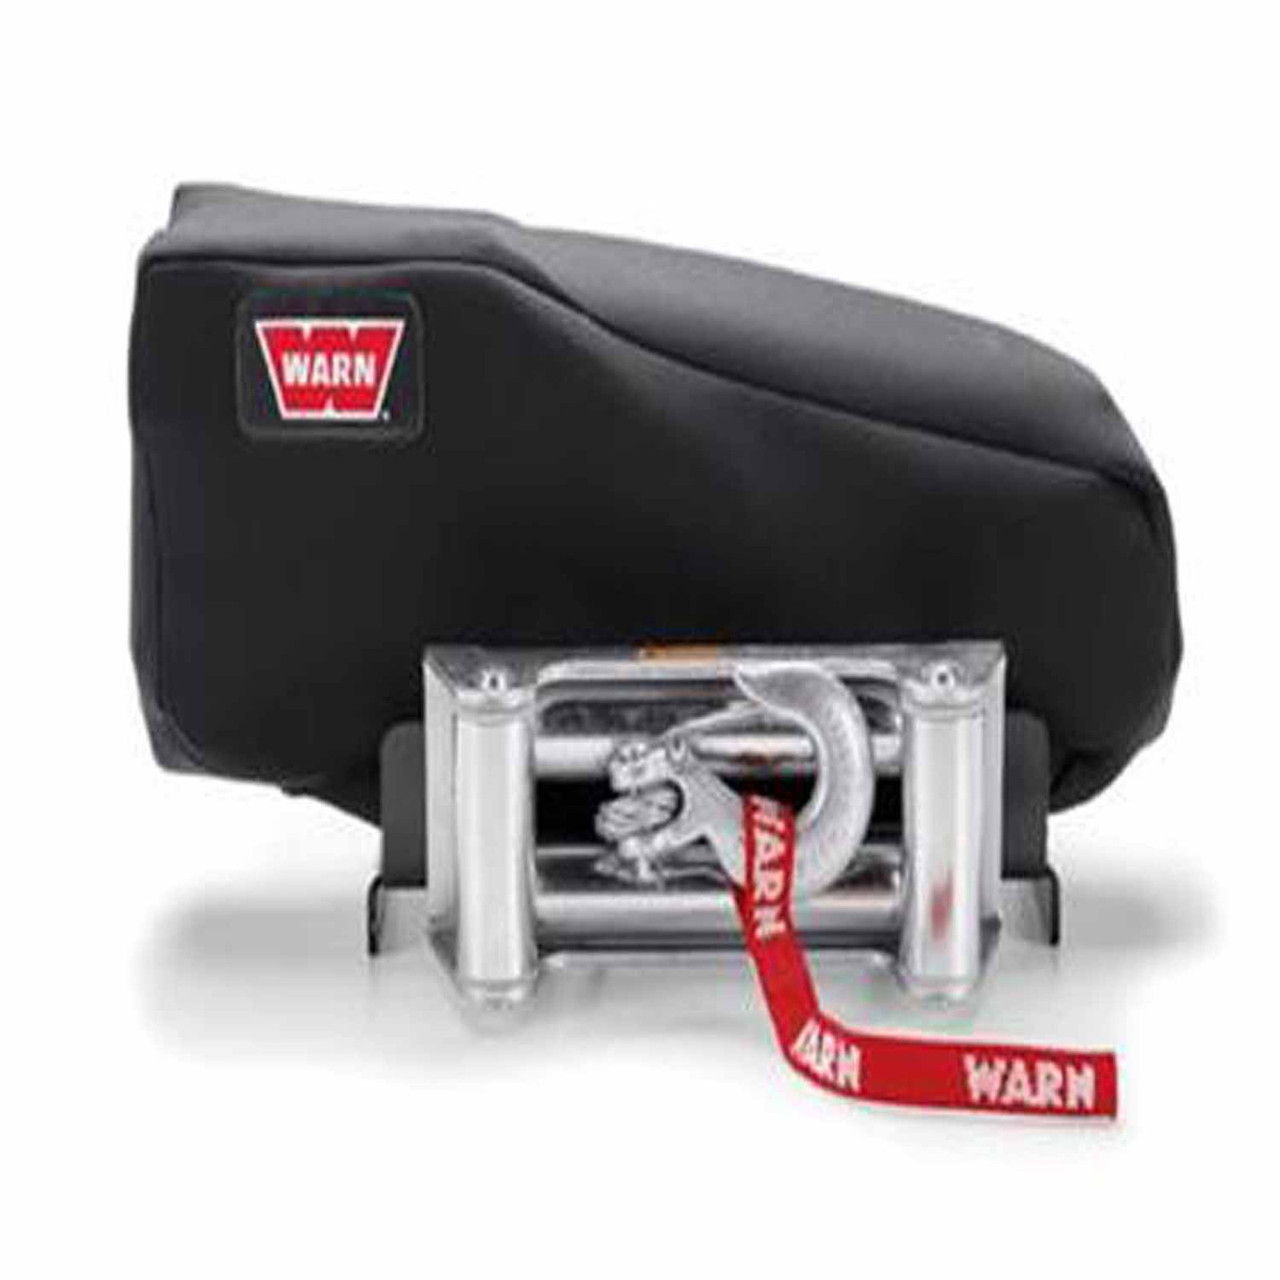 Buy Warn Industries 91414 M8000, XD9000, 9.5xp, VR8000/VR8000-S  VR10000/VR10000-S VR12000 and Tabor winch for 48.39 at Armageddon Turbo &  Performance